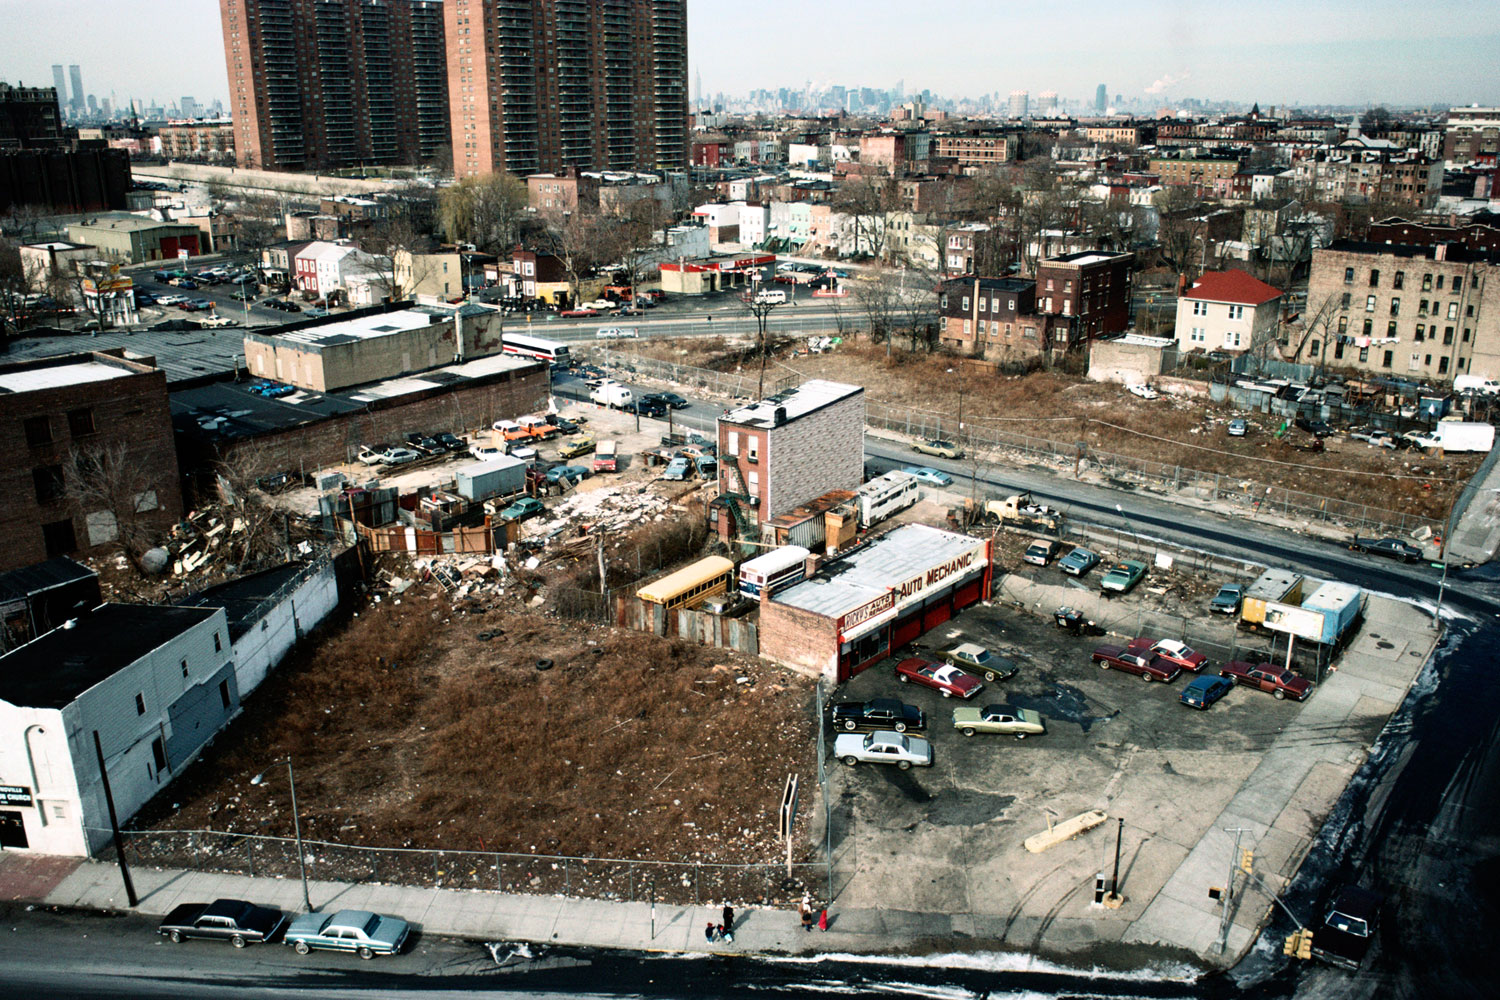 View southwest from the roof of the Howard Houses, Mother Gaston at East New York Avenue, Brooklyn, 1989. The section of Ocean Hill-Brownsville seen in the foreground was one of the poorest and most desolate neighborhoods in the city.